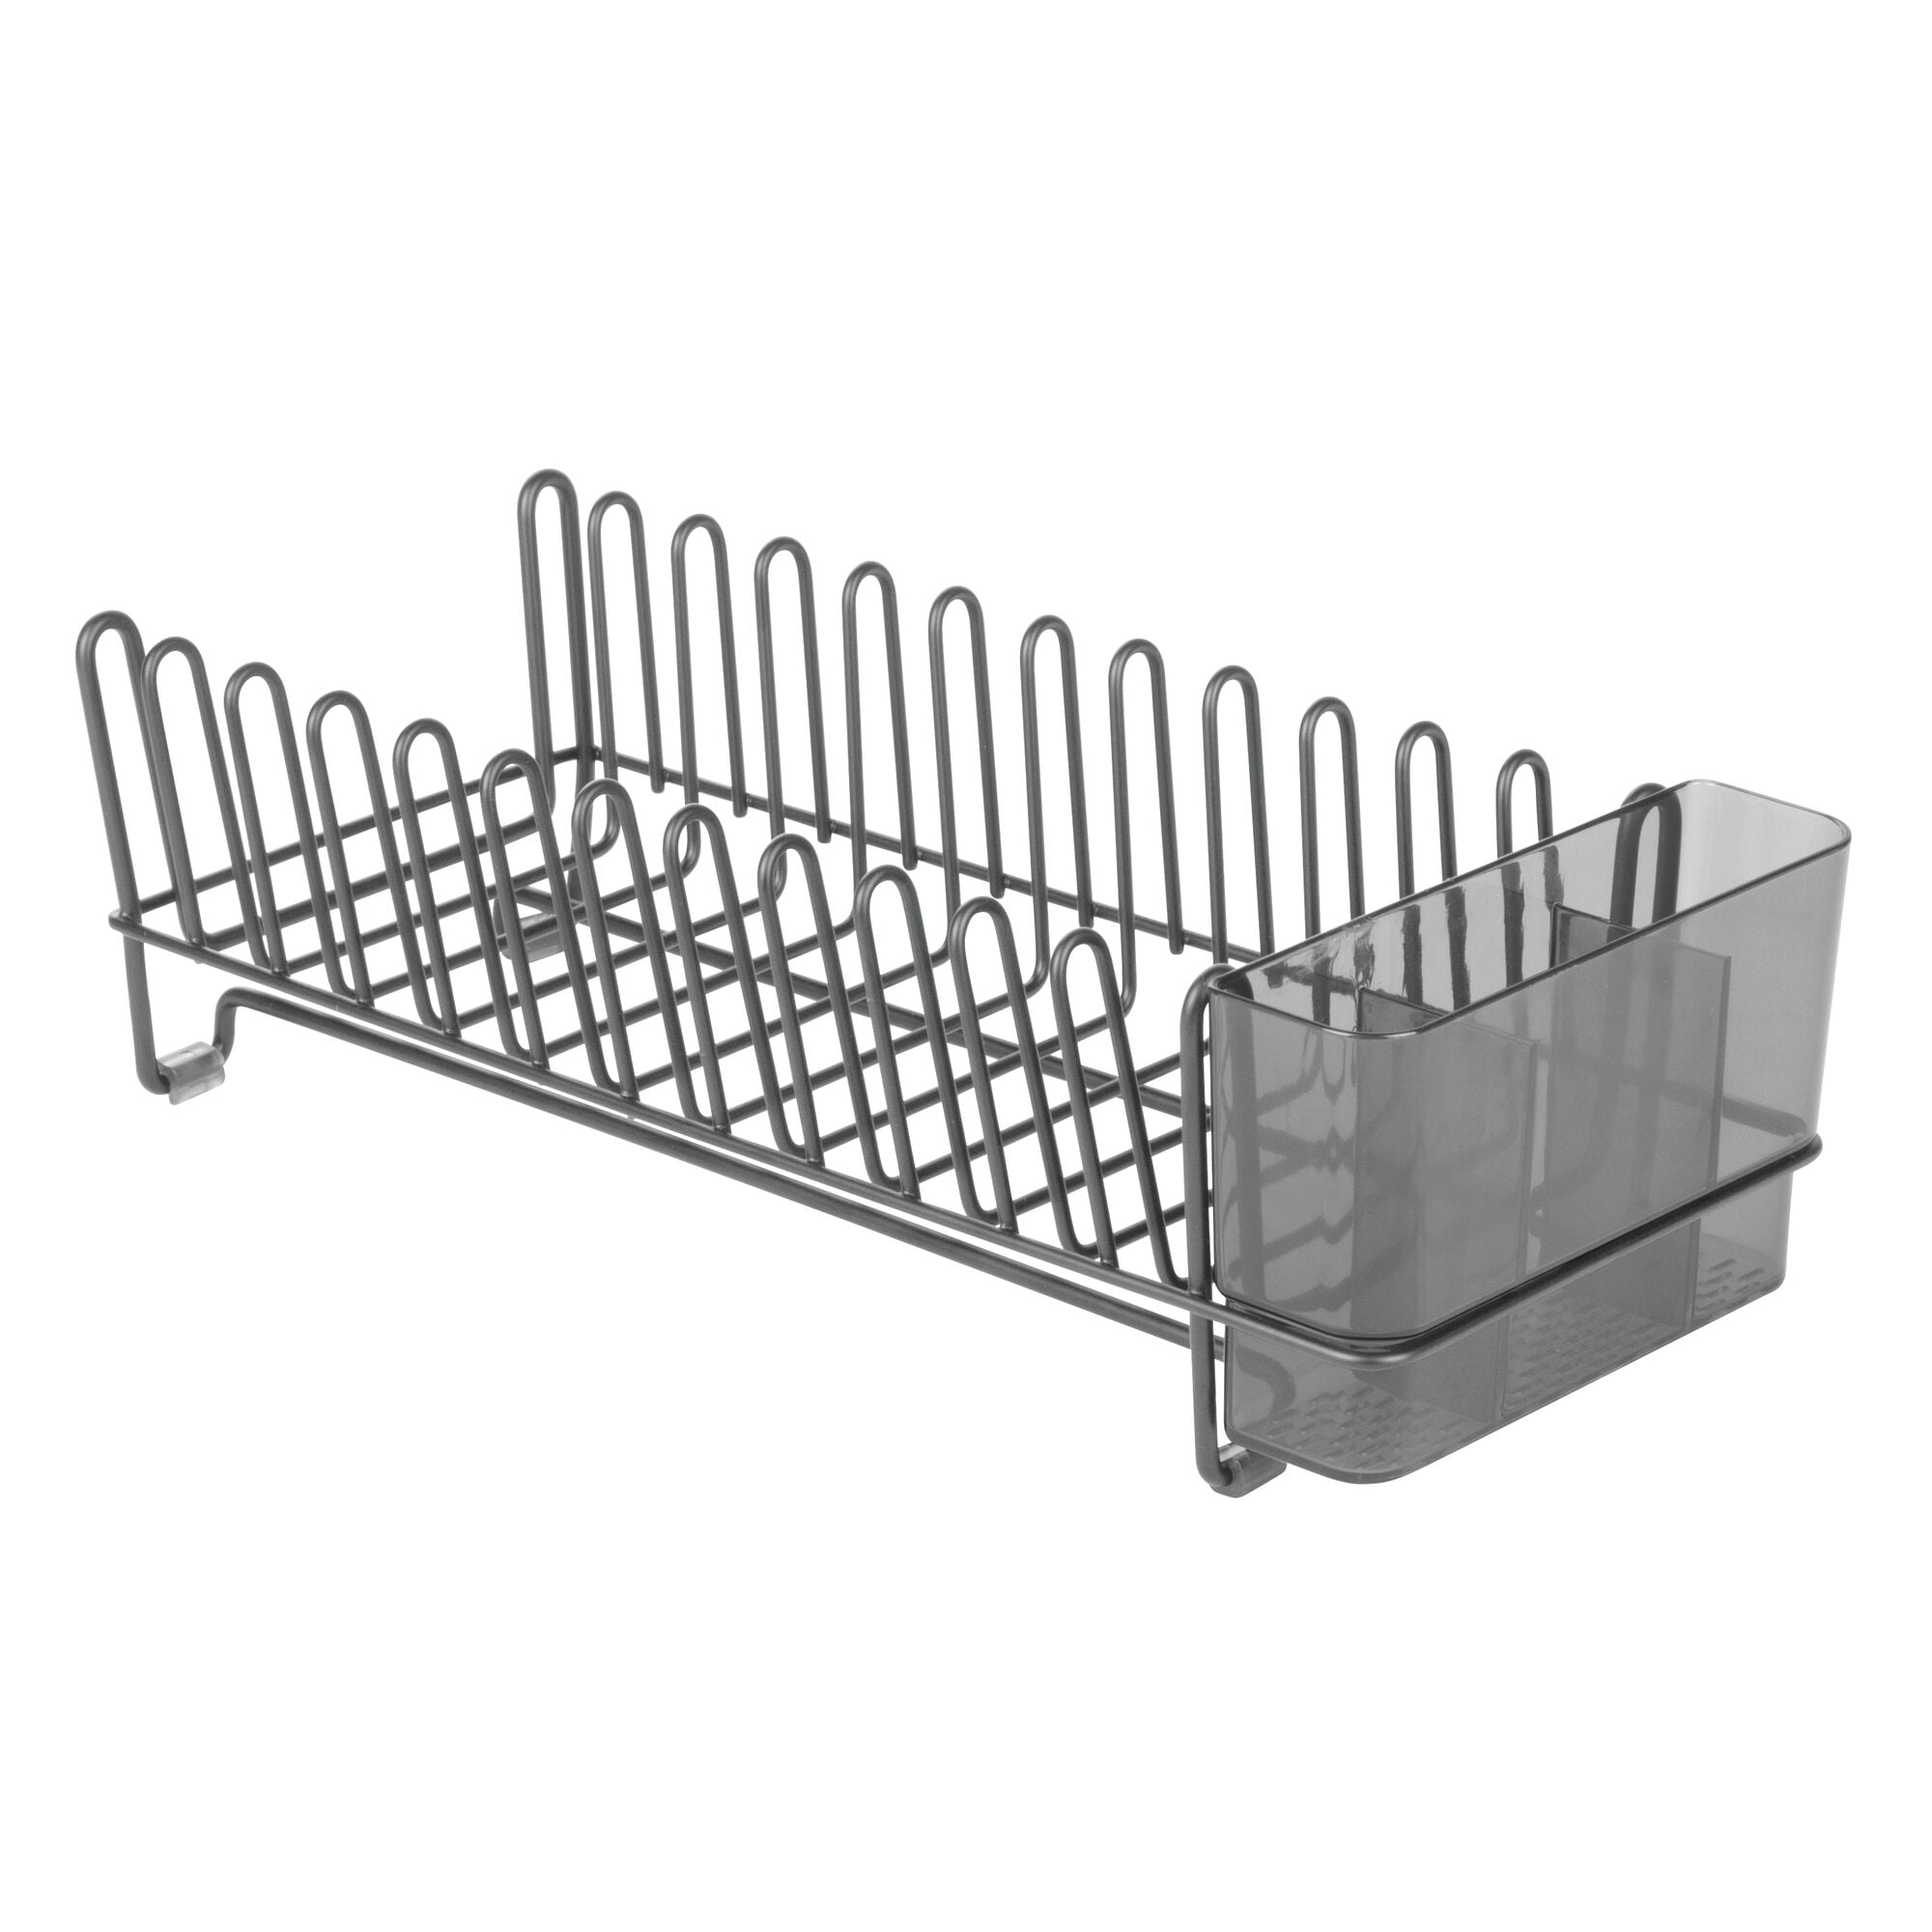  Dish Drying Rack,Compact Dish Drainer With Tray, Keeps